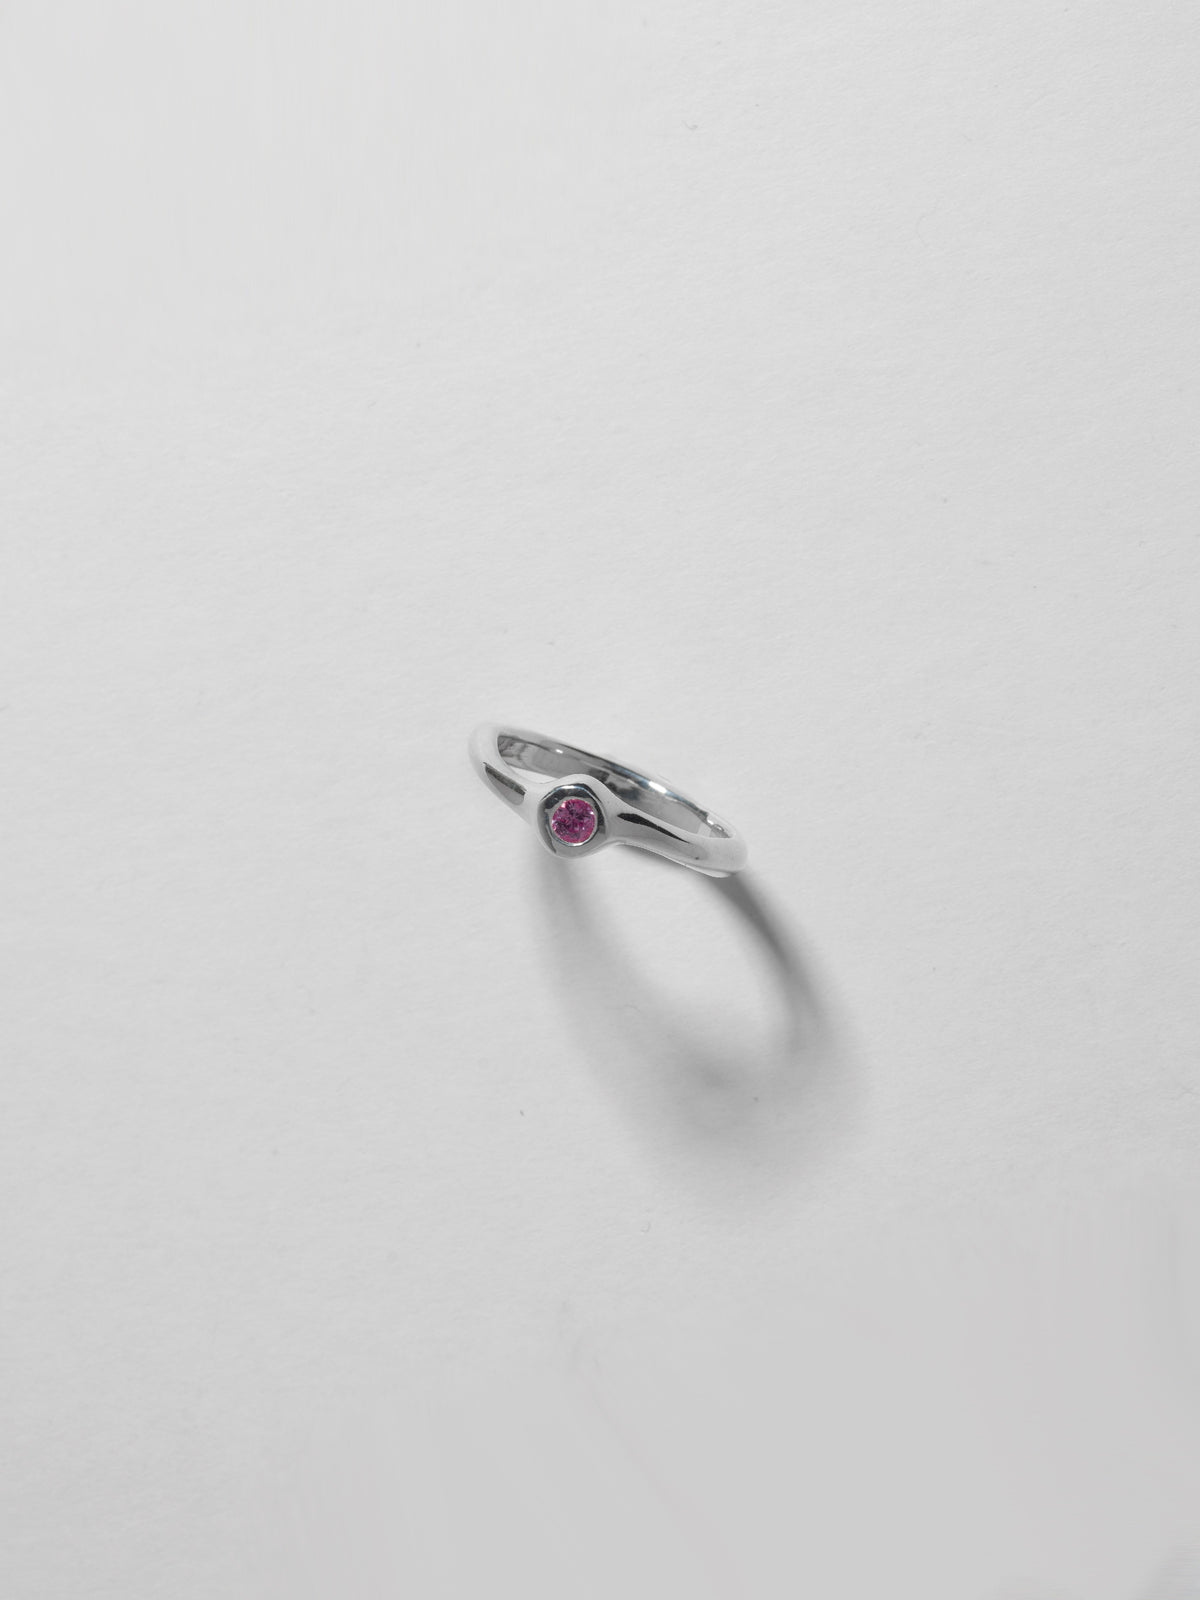 Close up image of FARIS SUGAR Ring in sterling silver with pink sapphire, standing up-right on white background, front view, gem visible